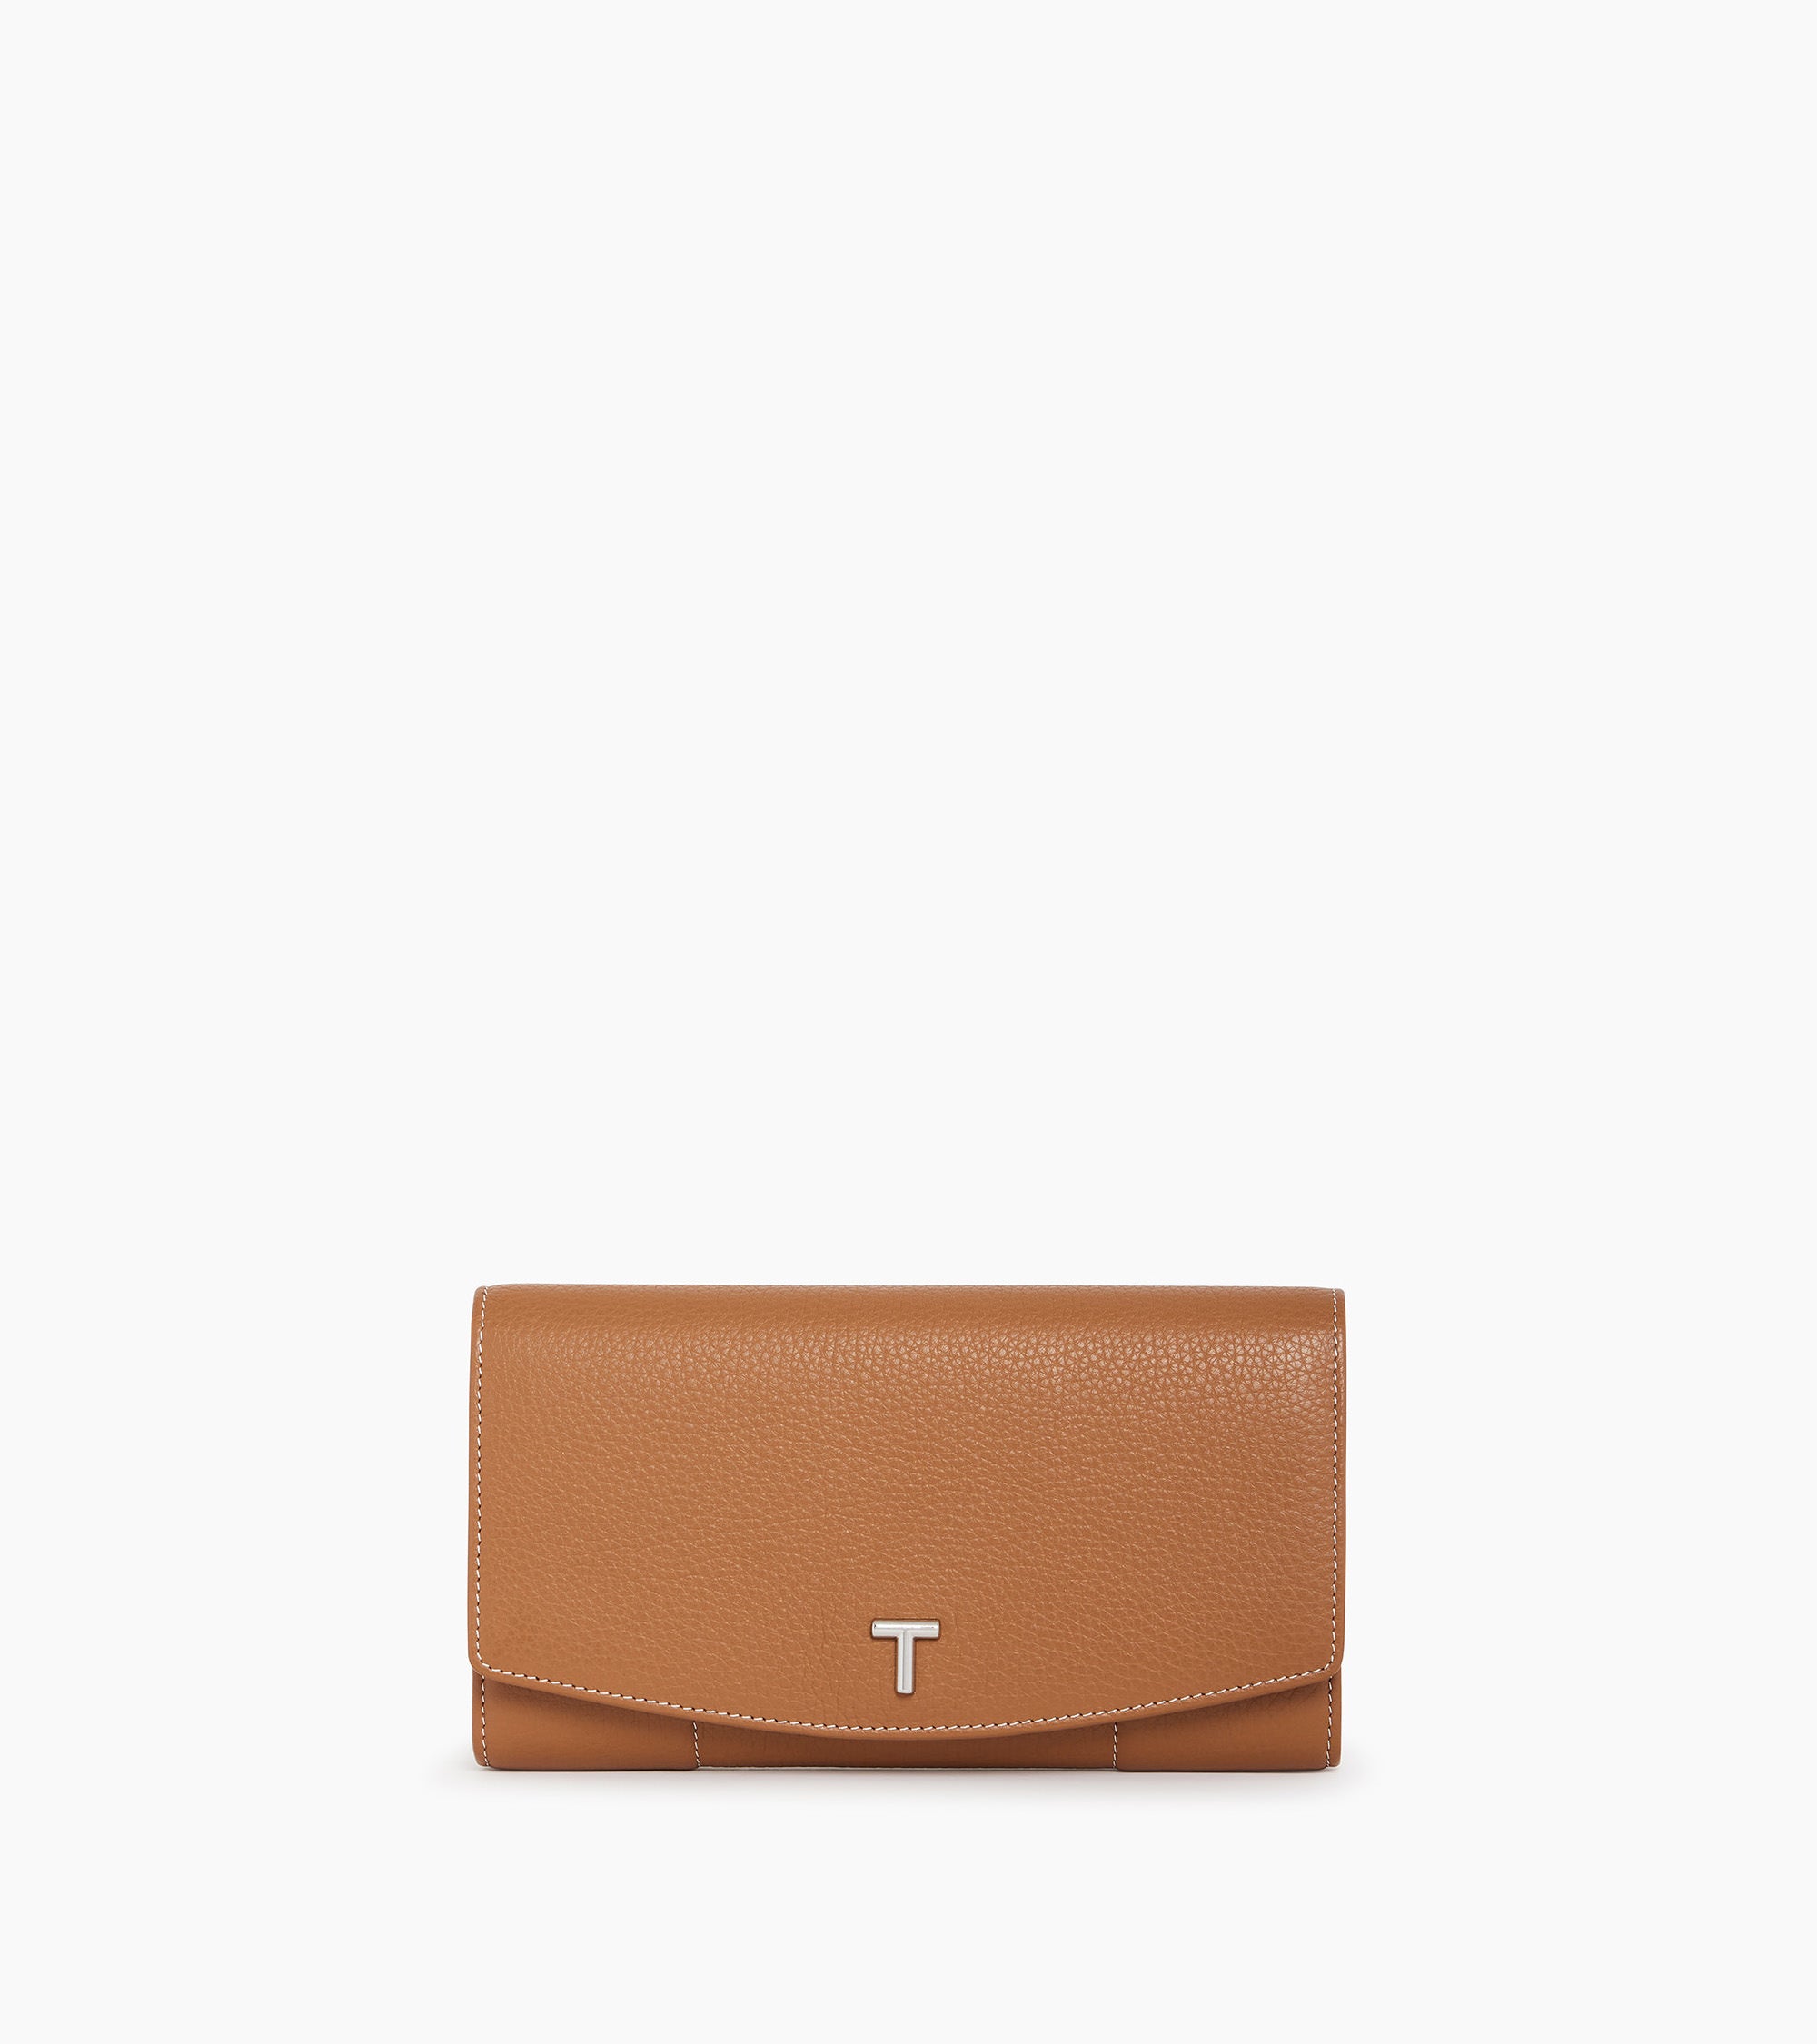 Romy large, zipped wallet in grained leather